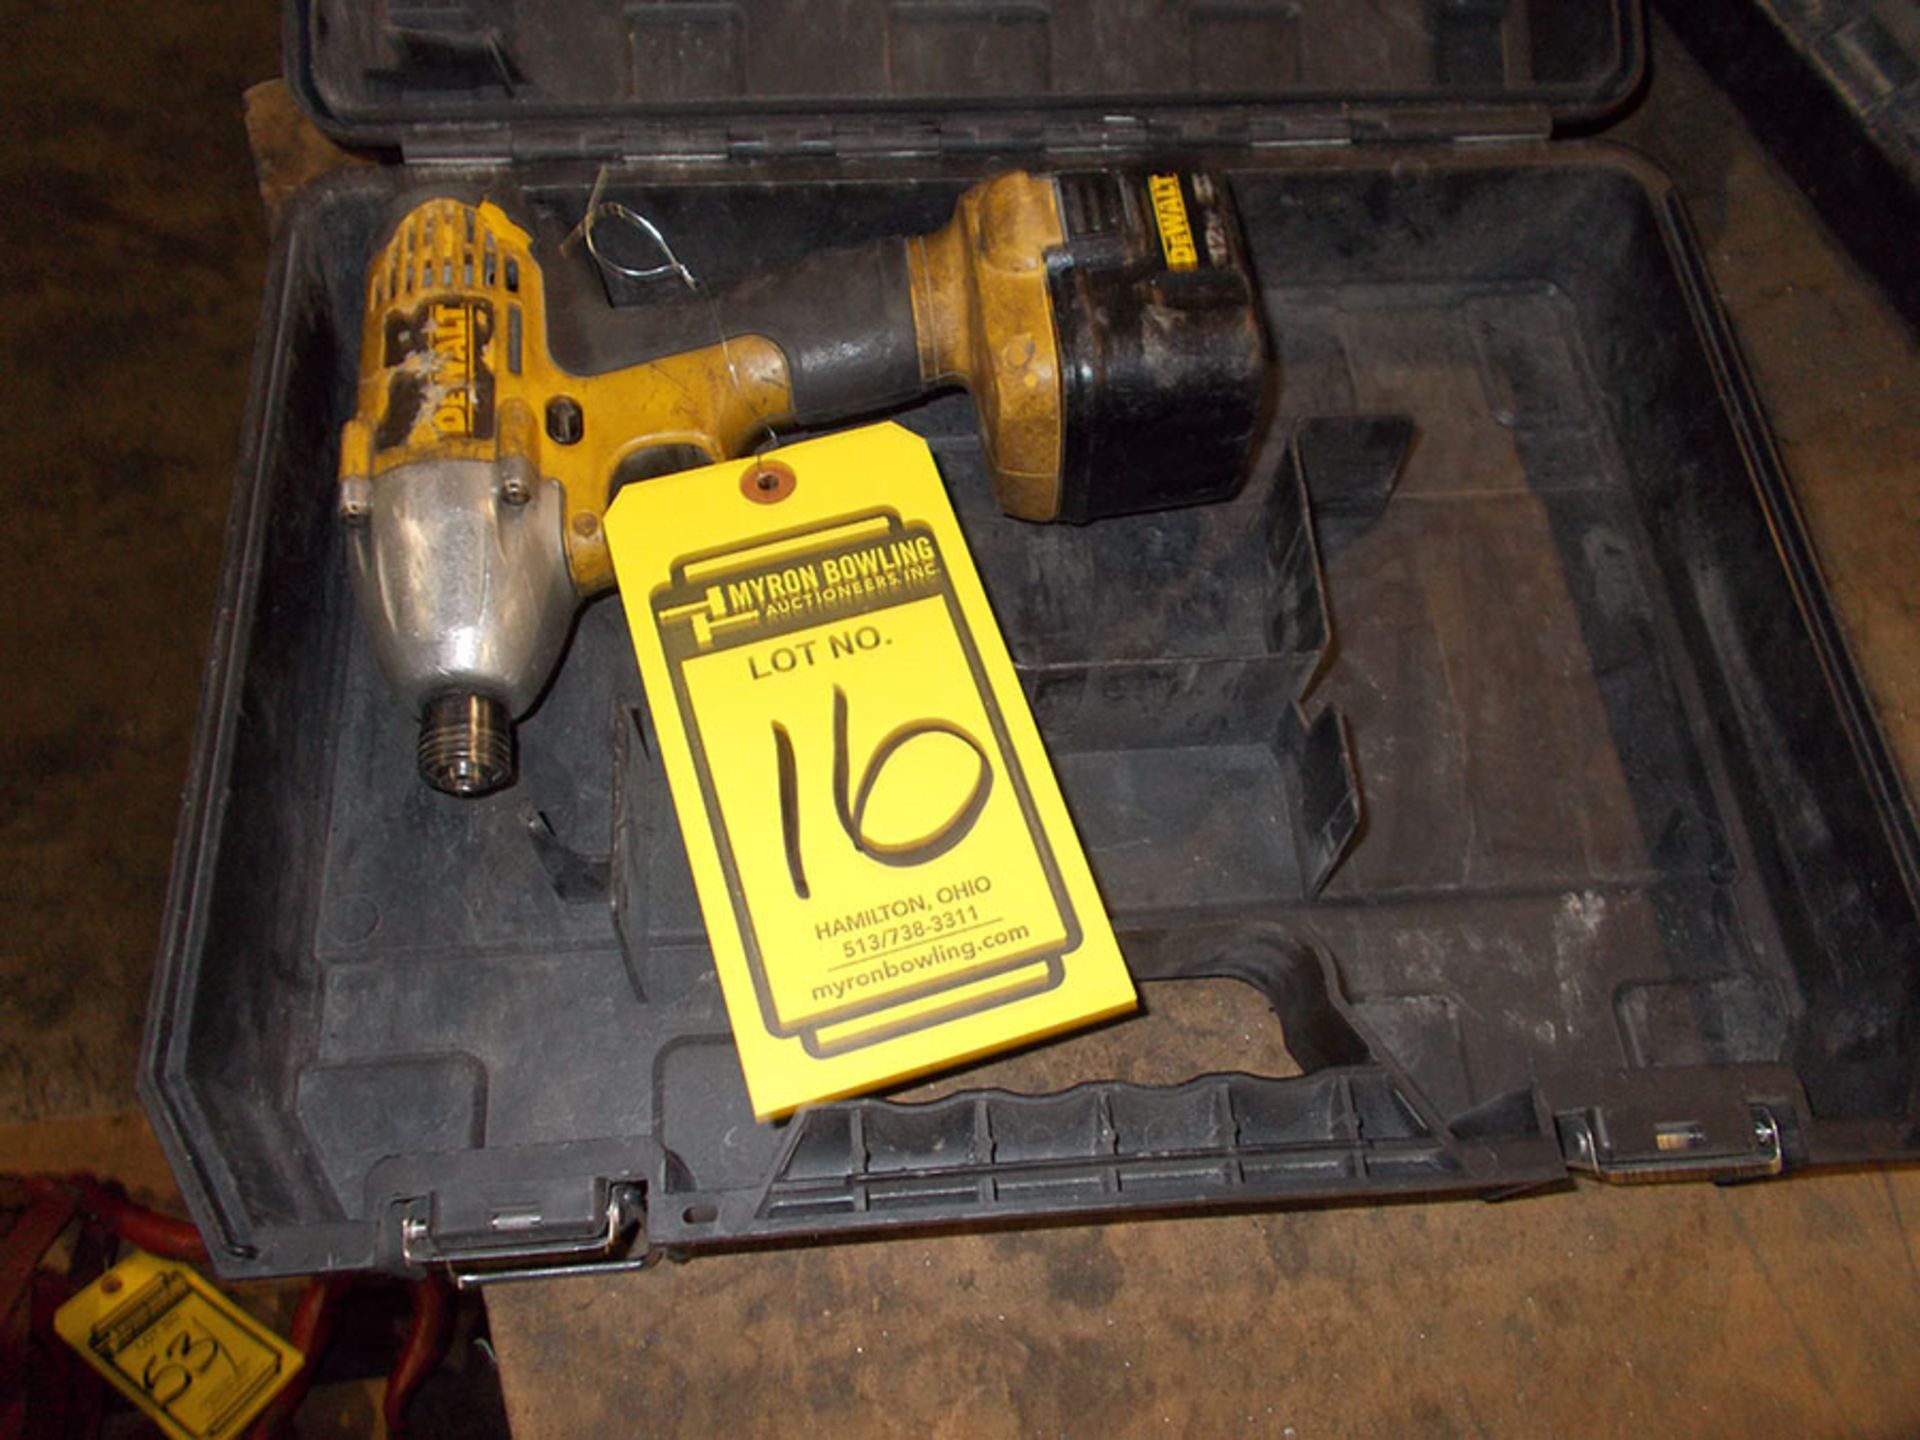 DEWALT 12 VOLT BATTERY DRILL WITH QUICK CONNECT CHUCK, NO CHARGER